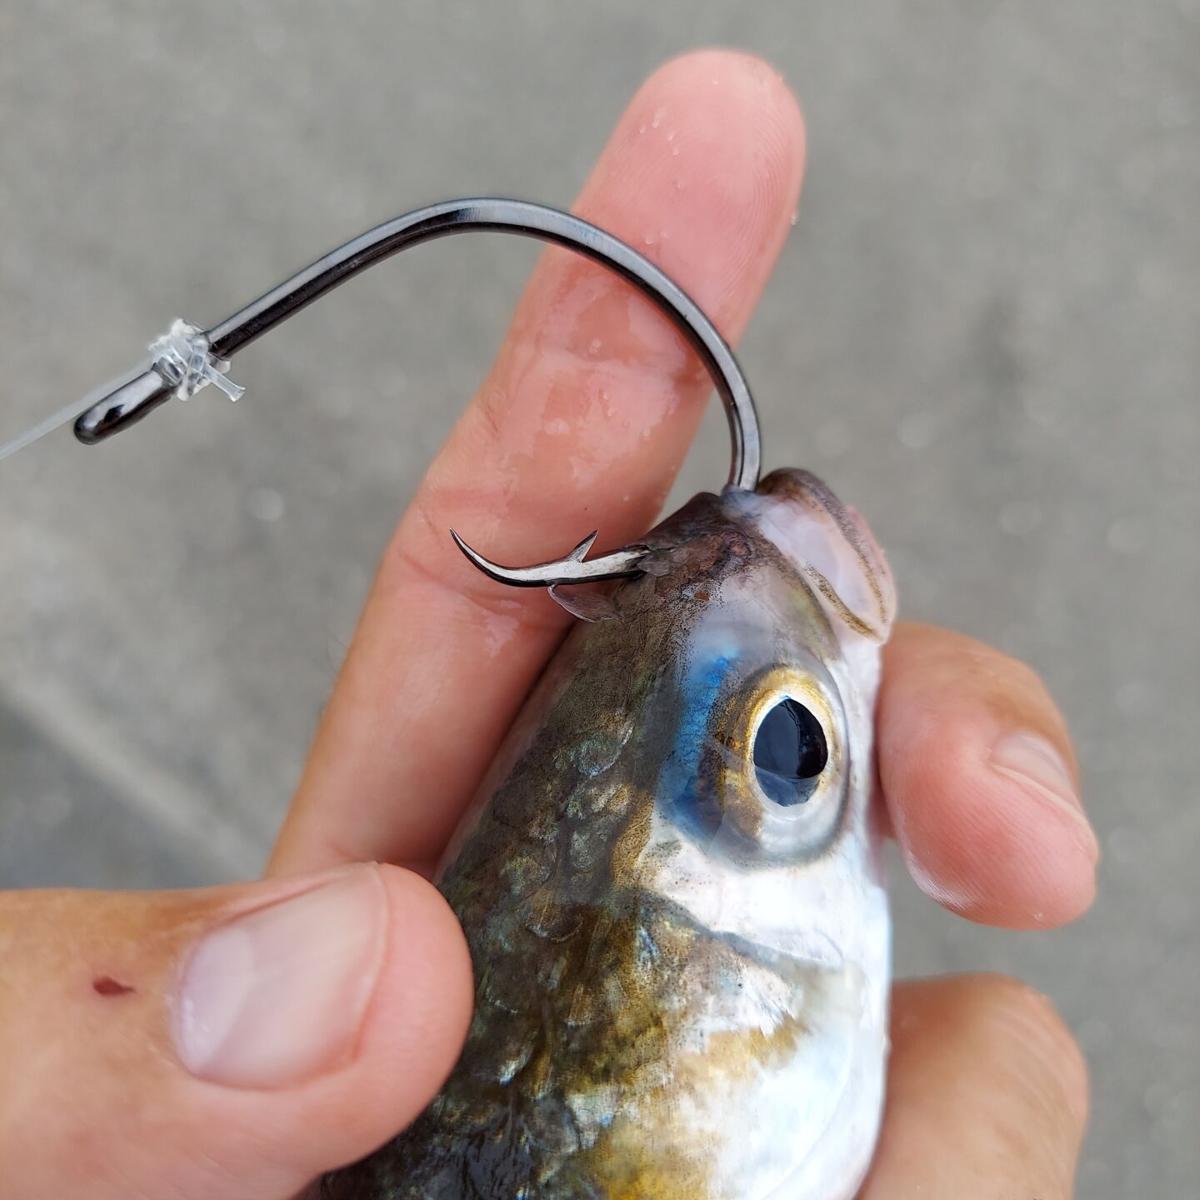 Anglers Swear By These Razor Sharp Fishing Hooks—And They're Just